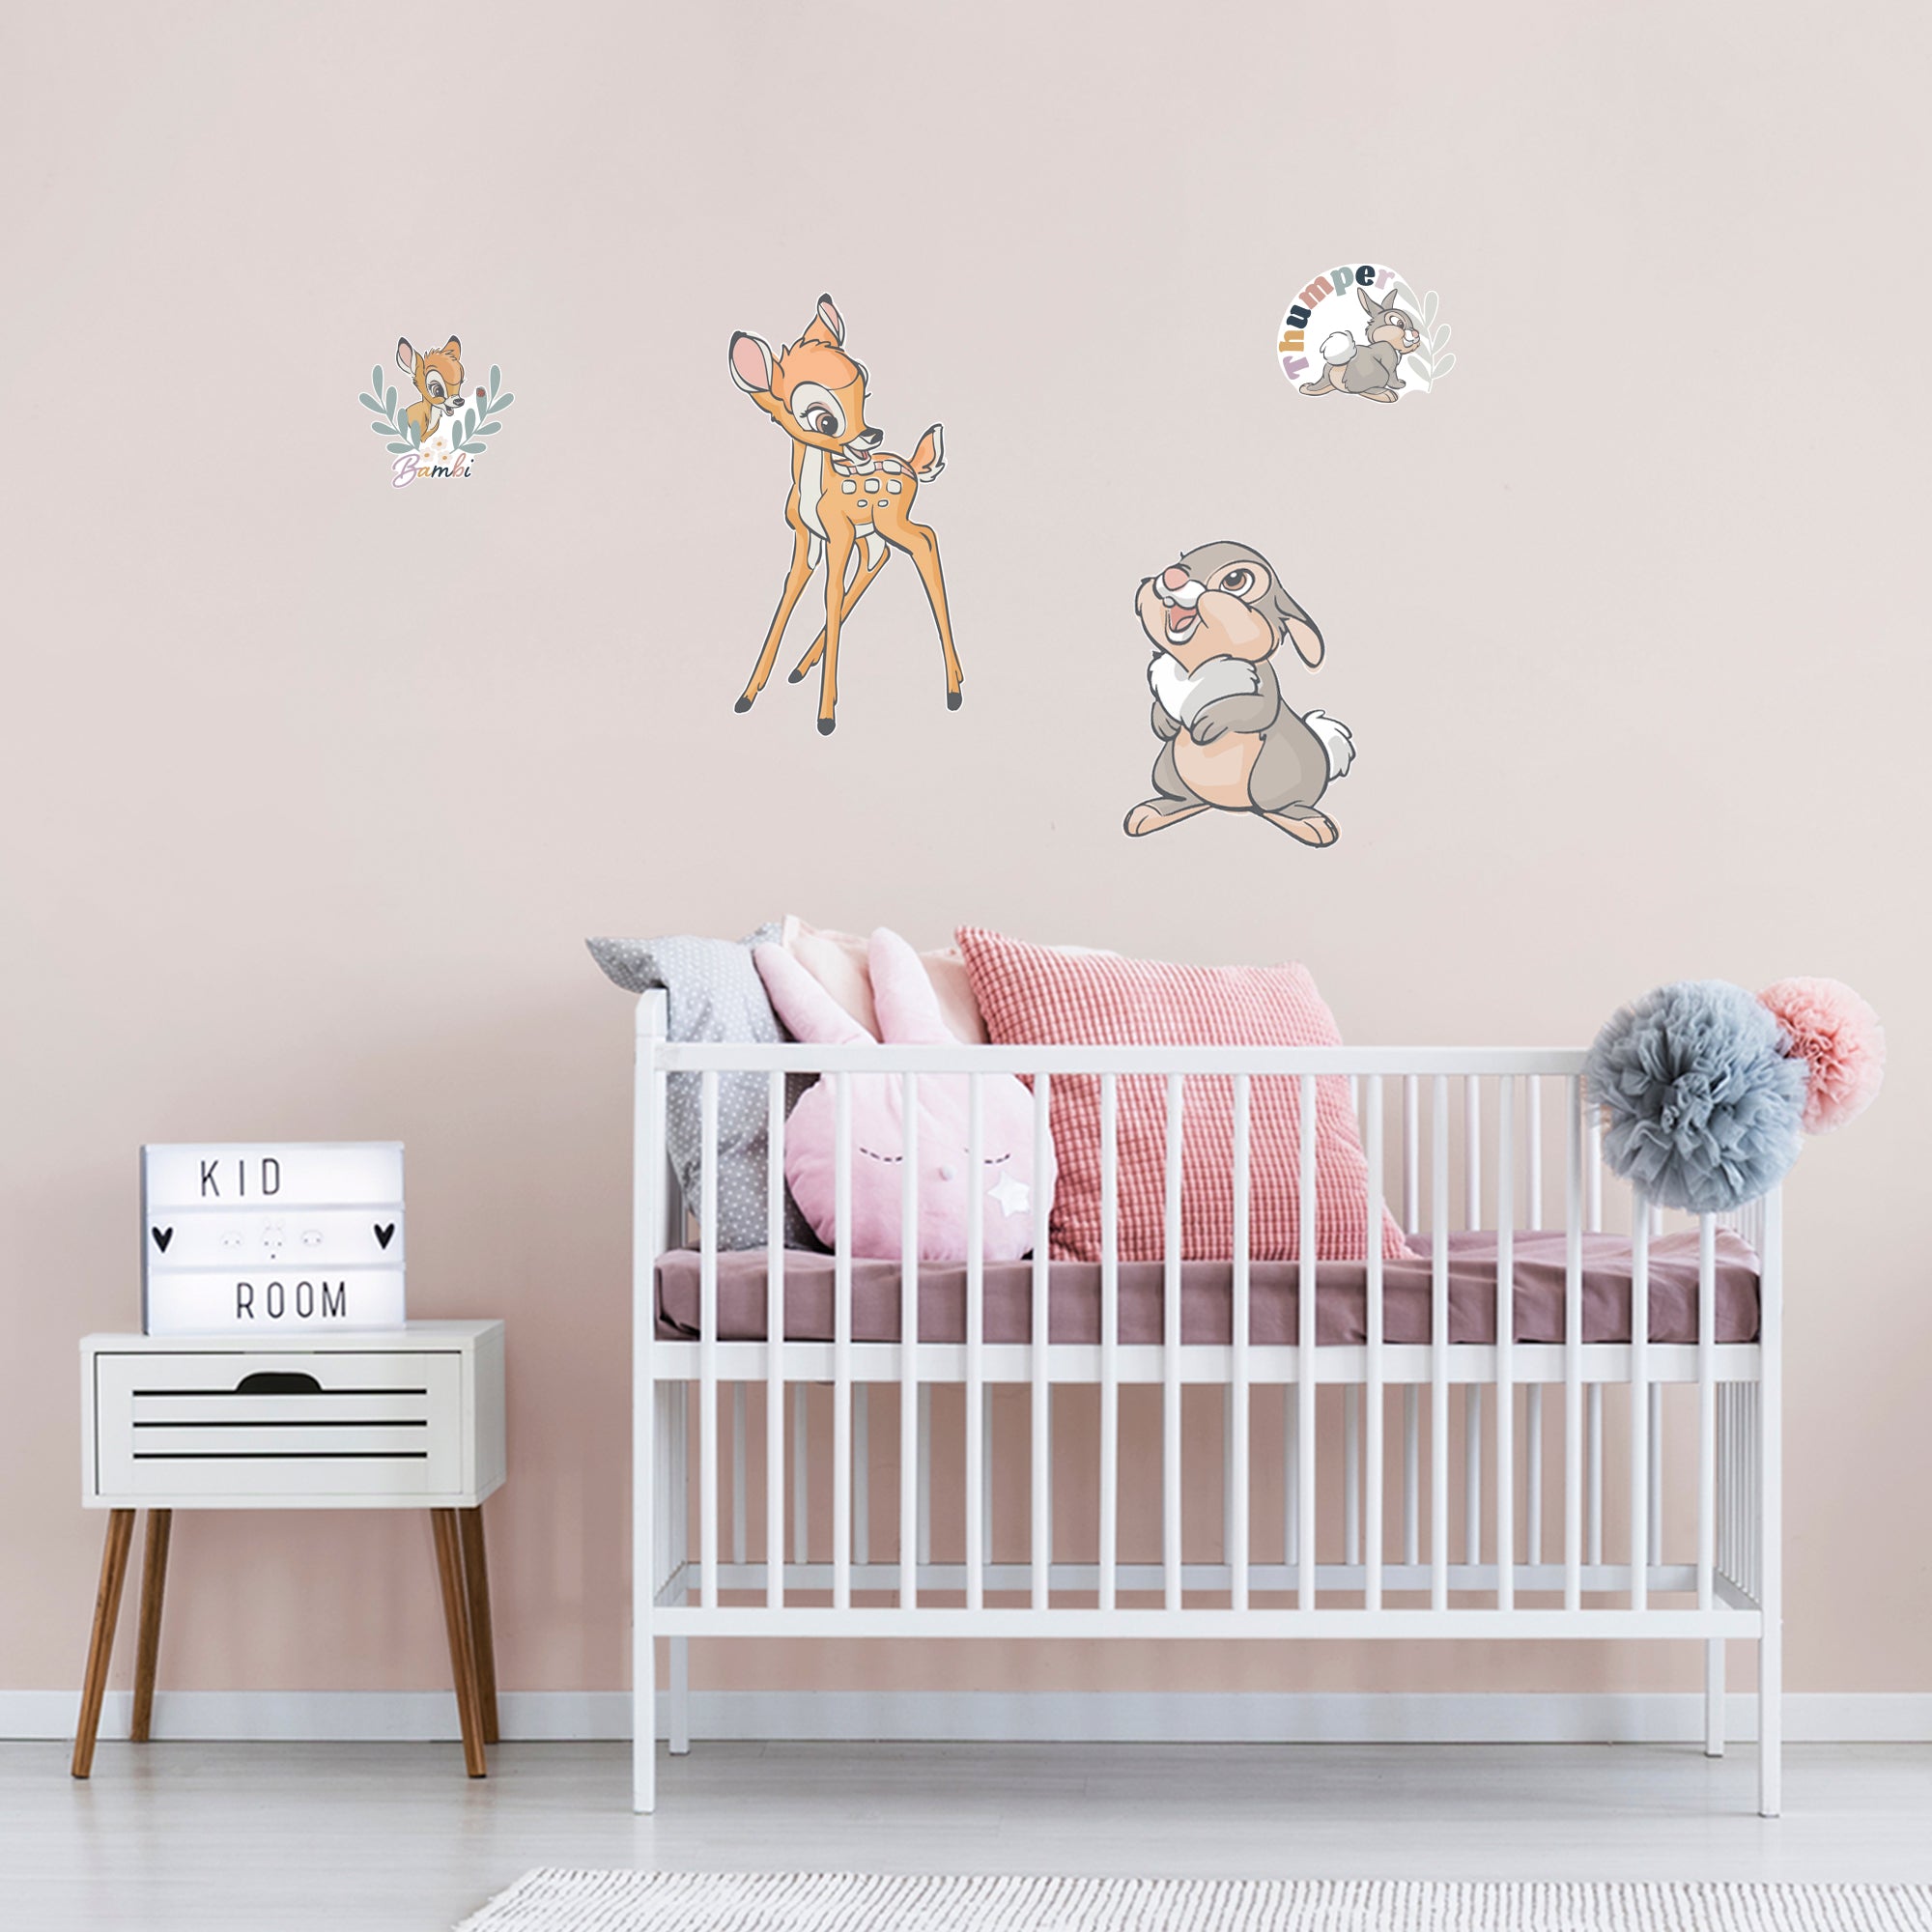 Bambi and Thumper Before the Bloom - Officially Licensed Disney Removable Wall Decal XL by Fathead | Vinyl